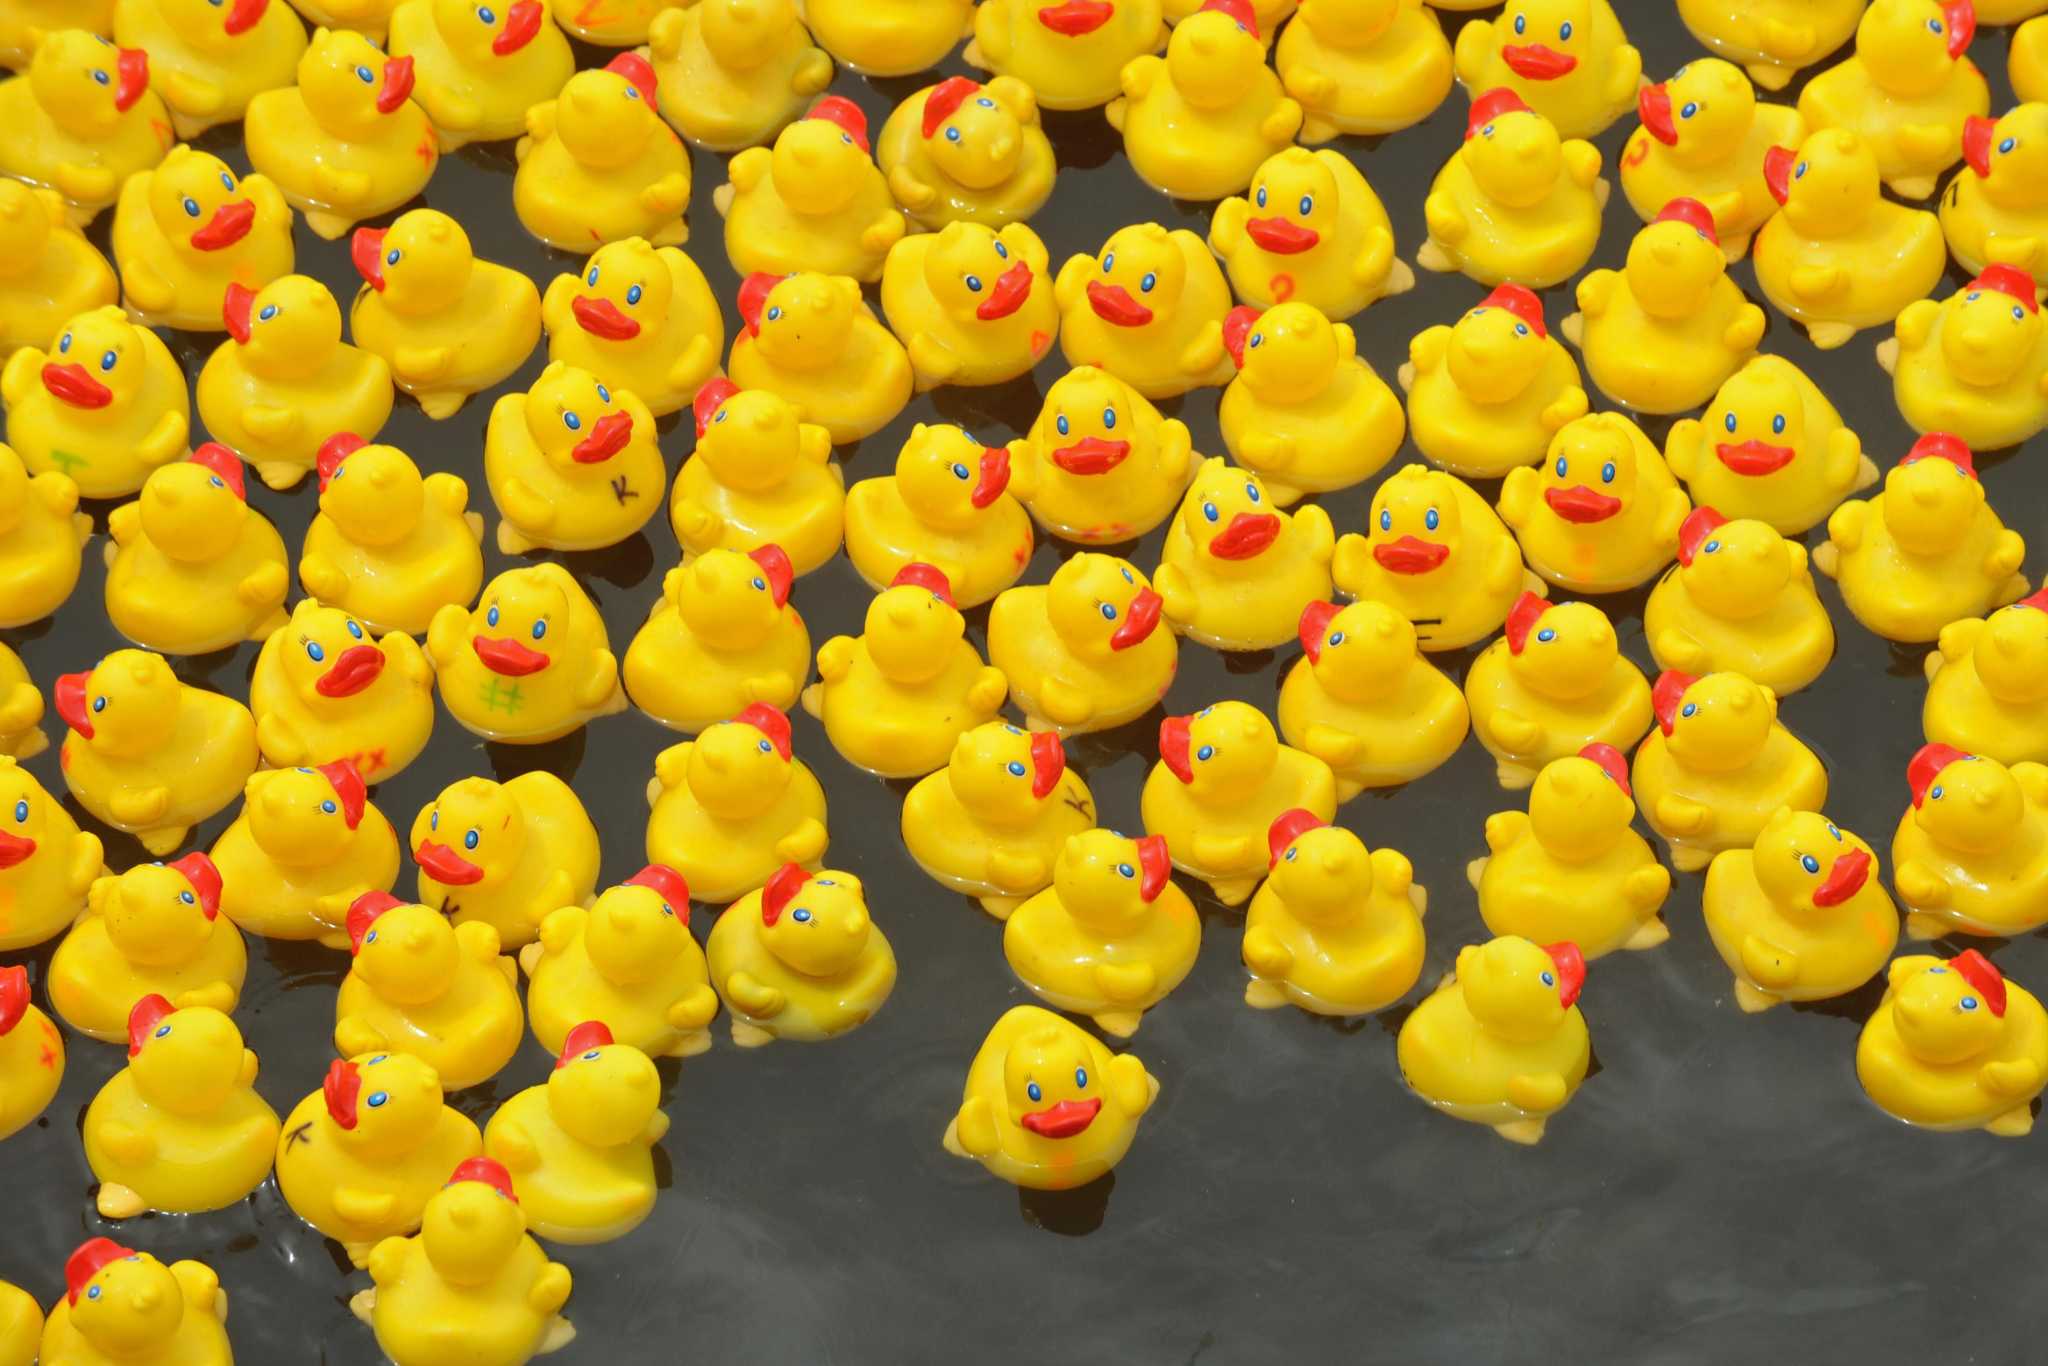 Westport's annual Duck Race goes virtual this year